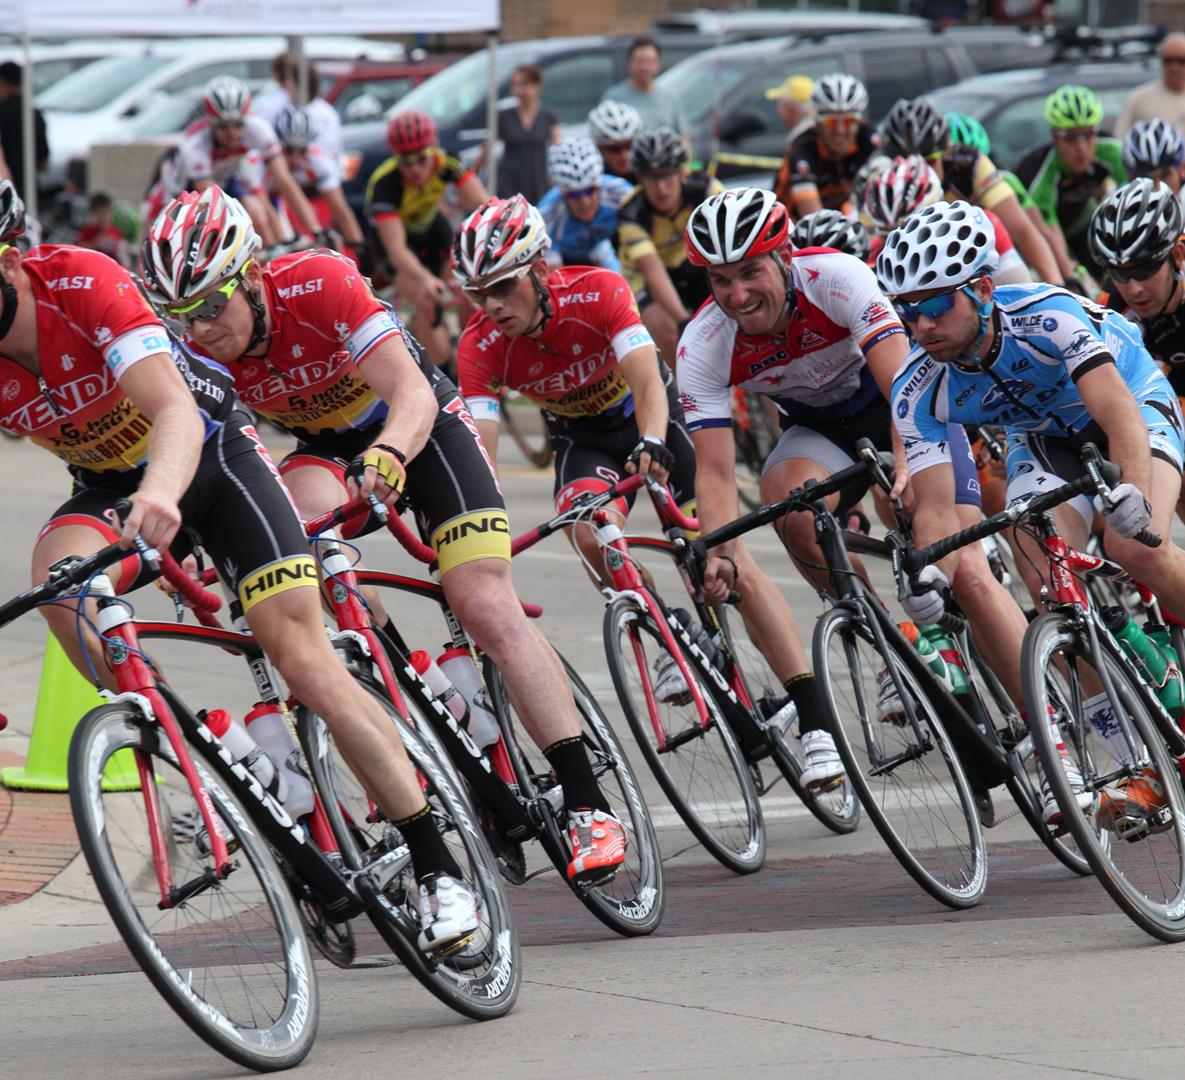 Tour de Crystal Lake: A Big Event in a Small Community